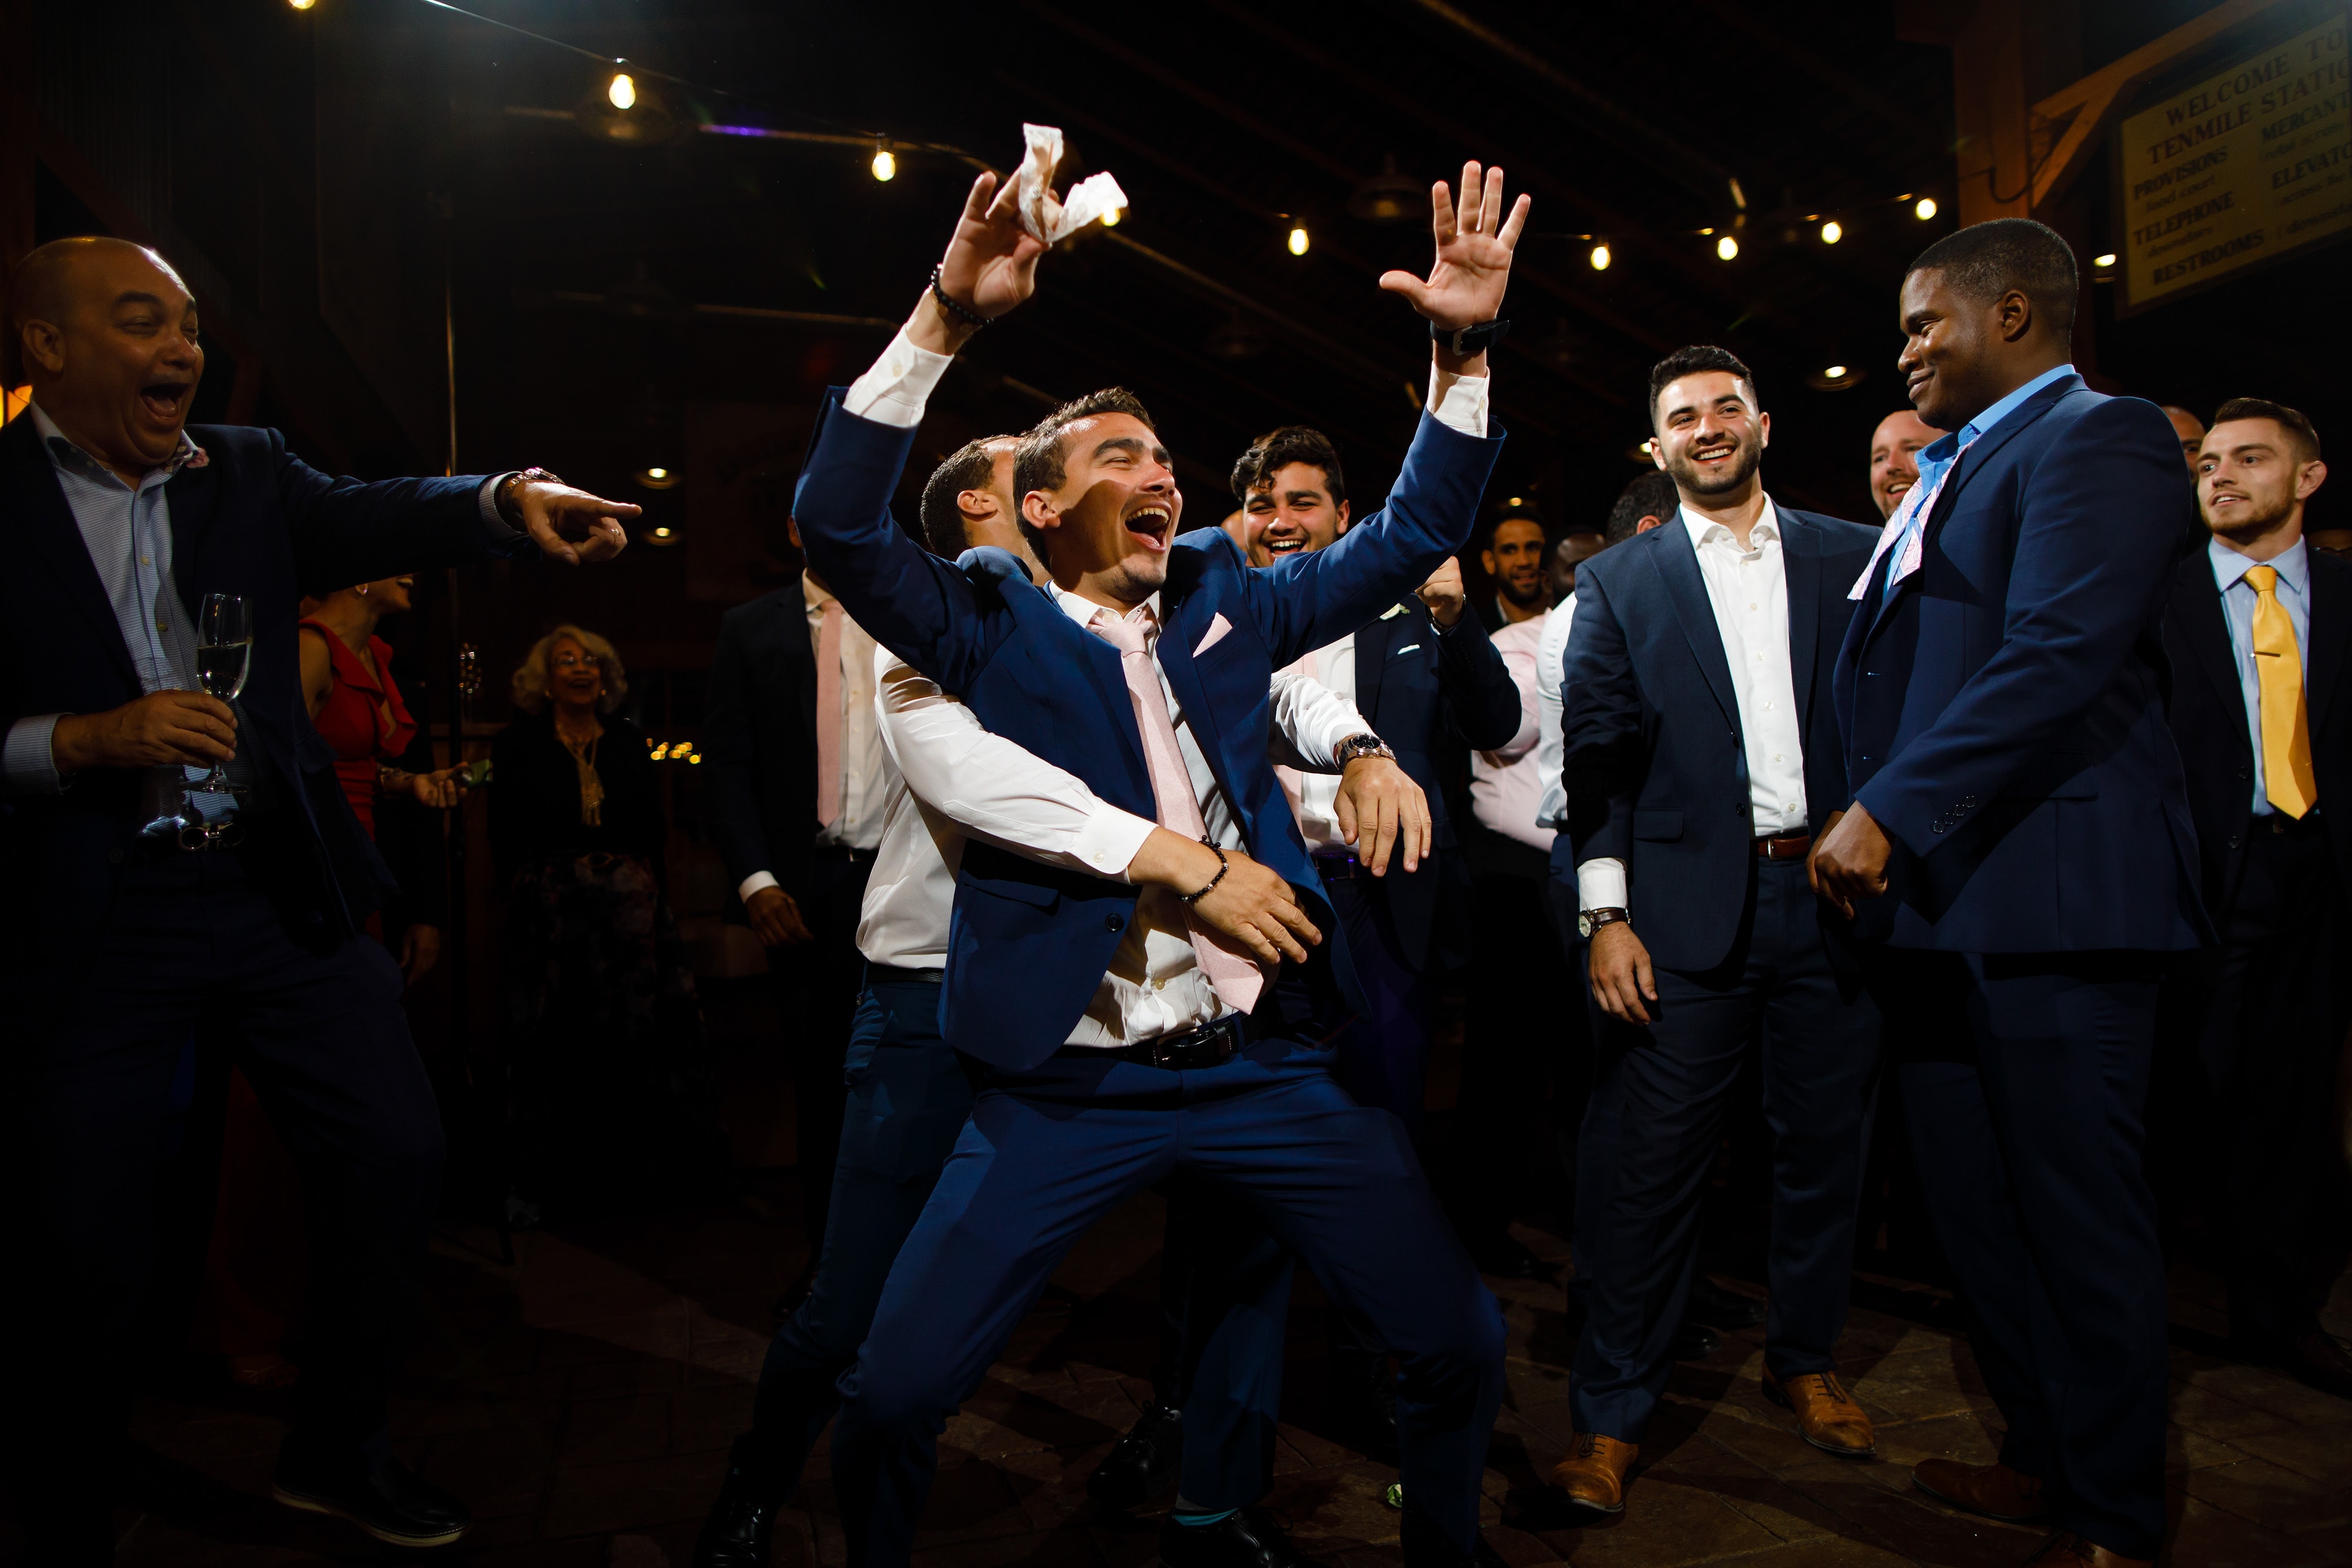 A groomsmen celebrates after catching the garter